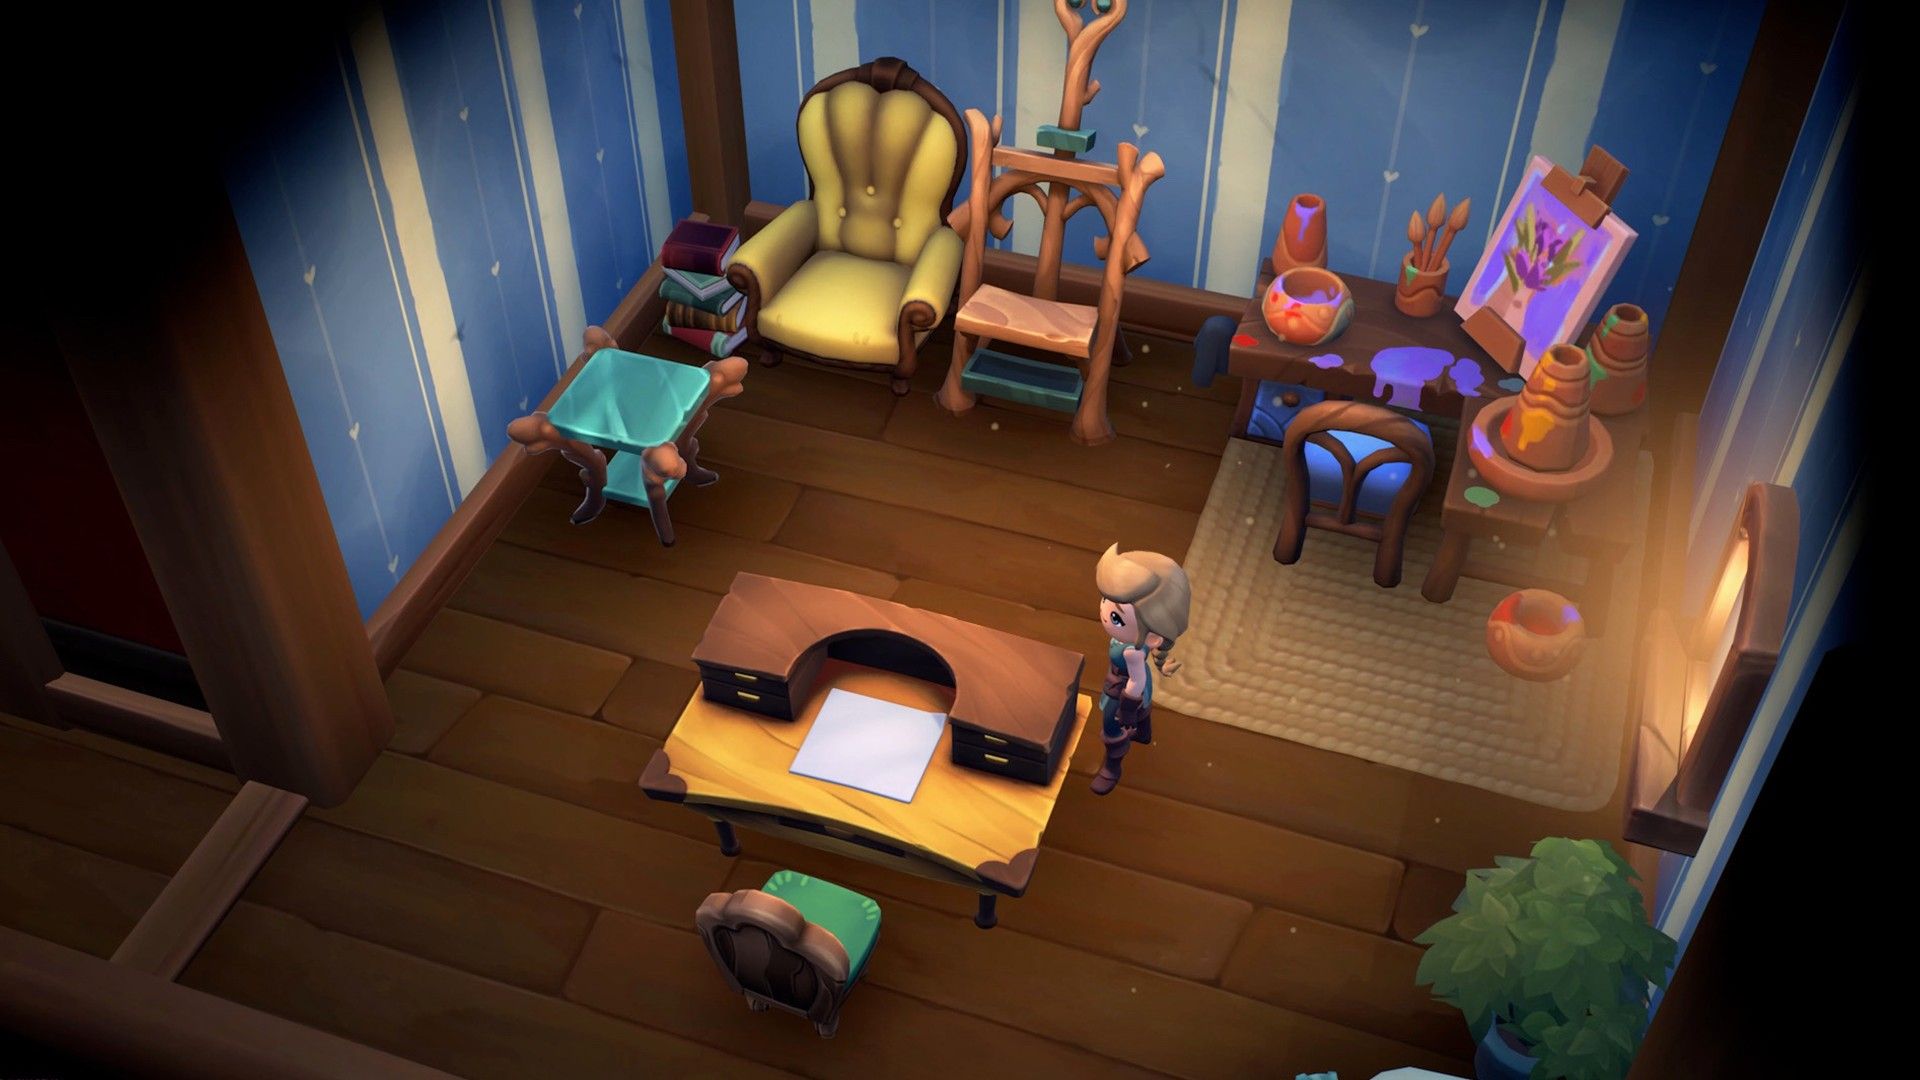 Fae Farm home interior showing a character next to a desk, an artist's painting area, and chairs.